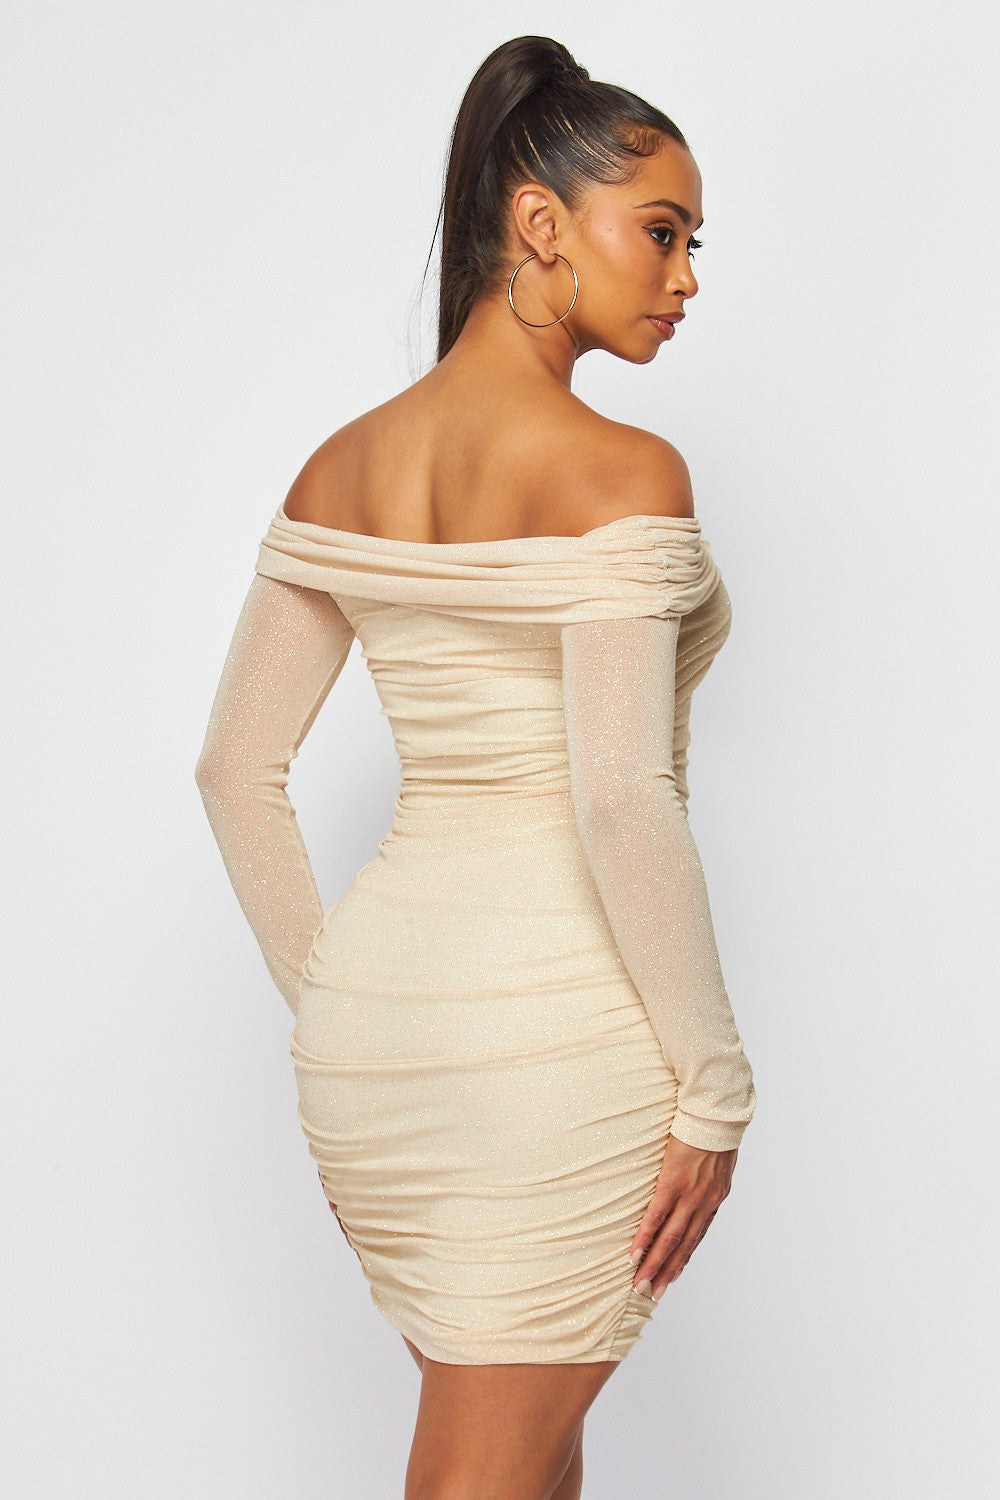 "Old Fashion Glam" Champagne Long Sleeve Dress